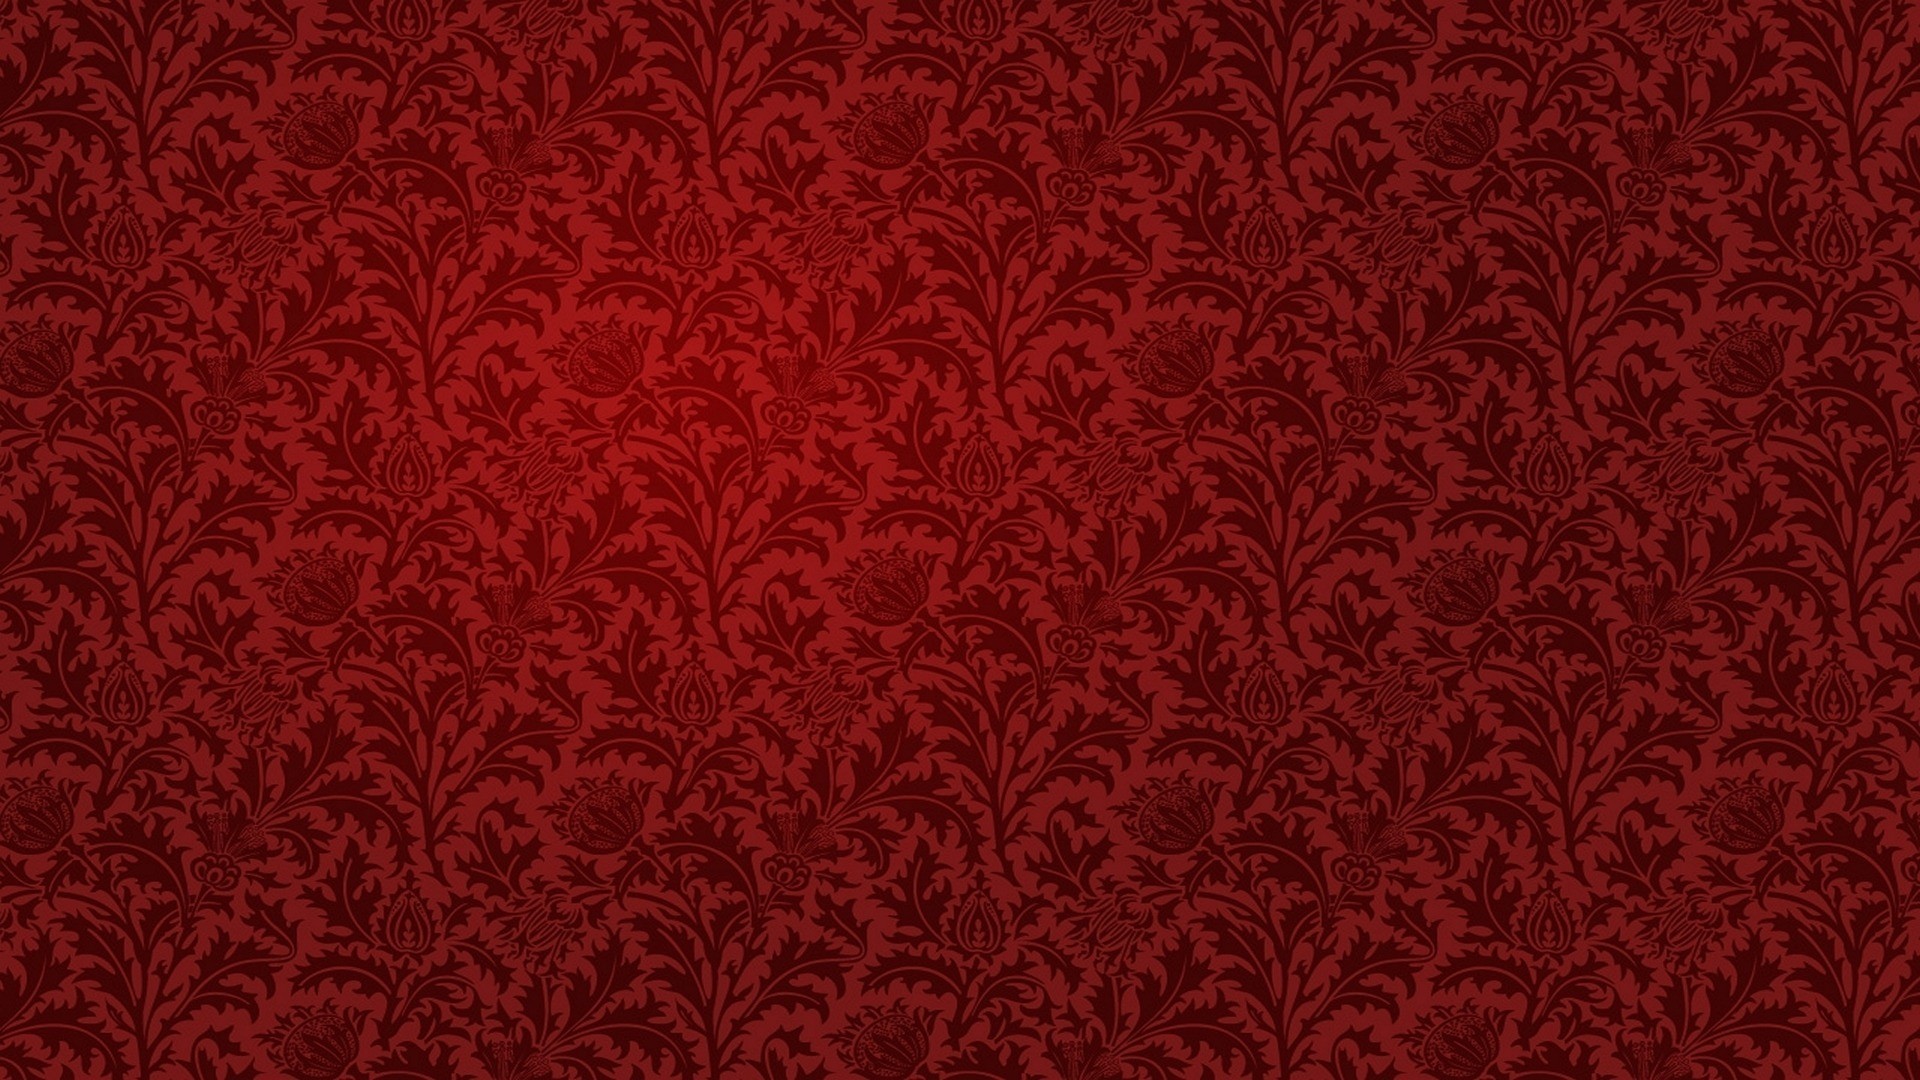 Red Patterns Wallpaper 1920x1080 Red Patterns